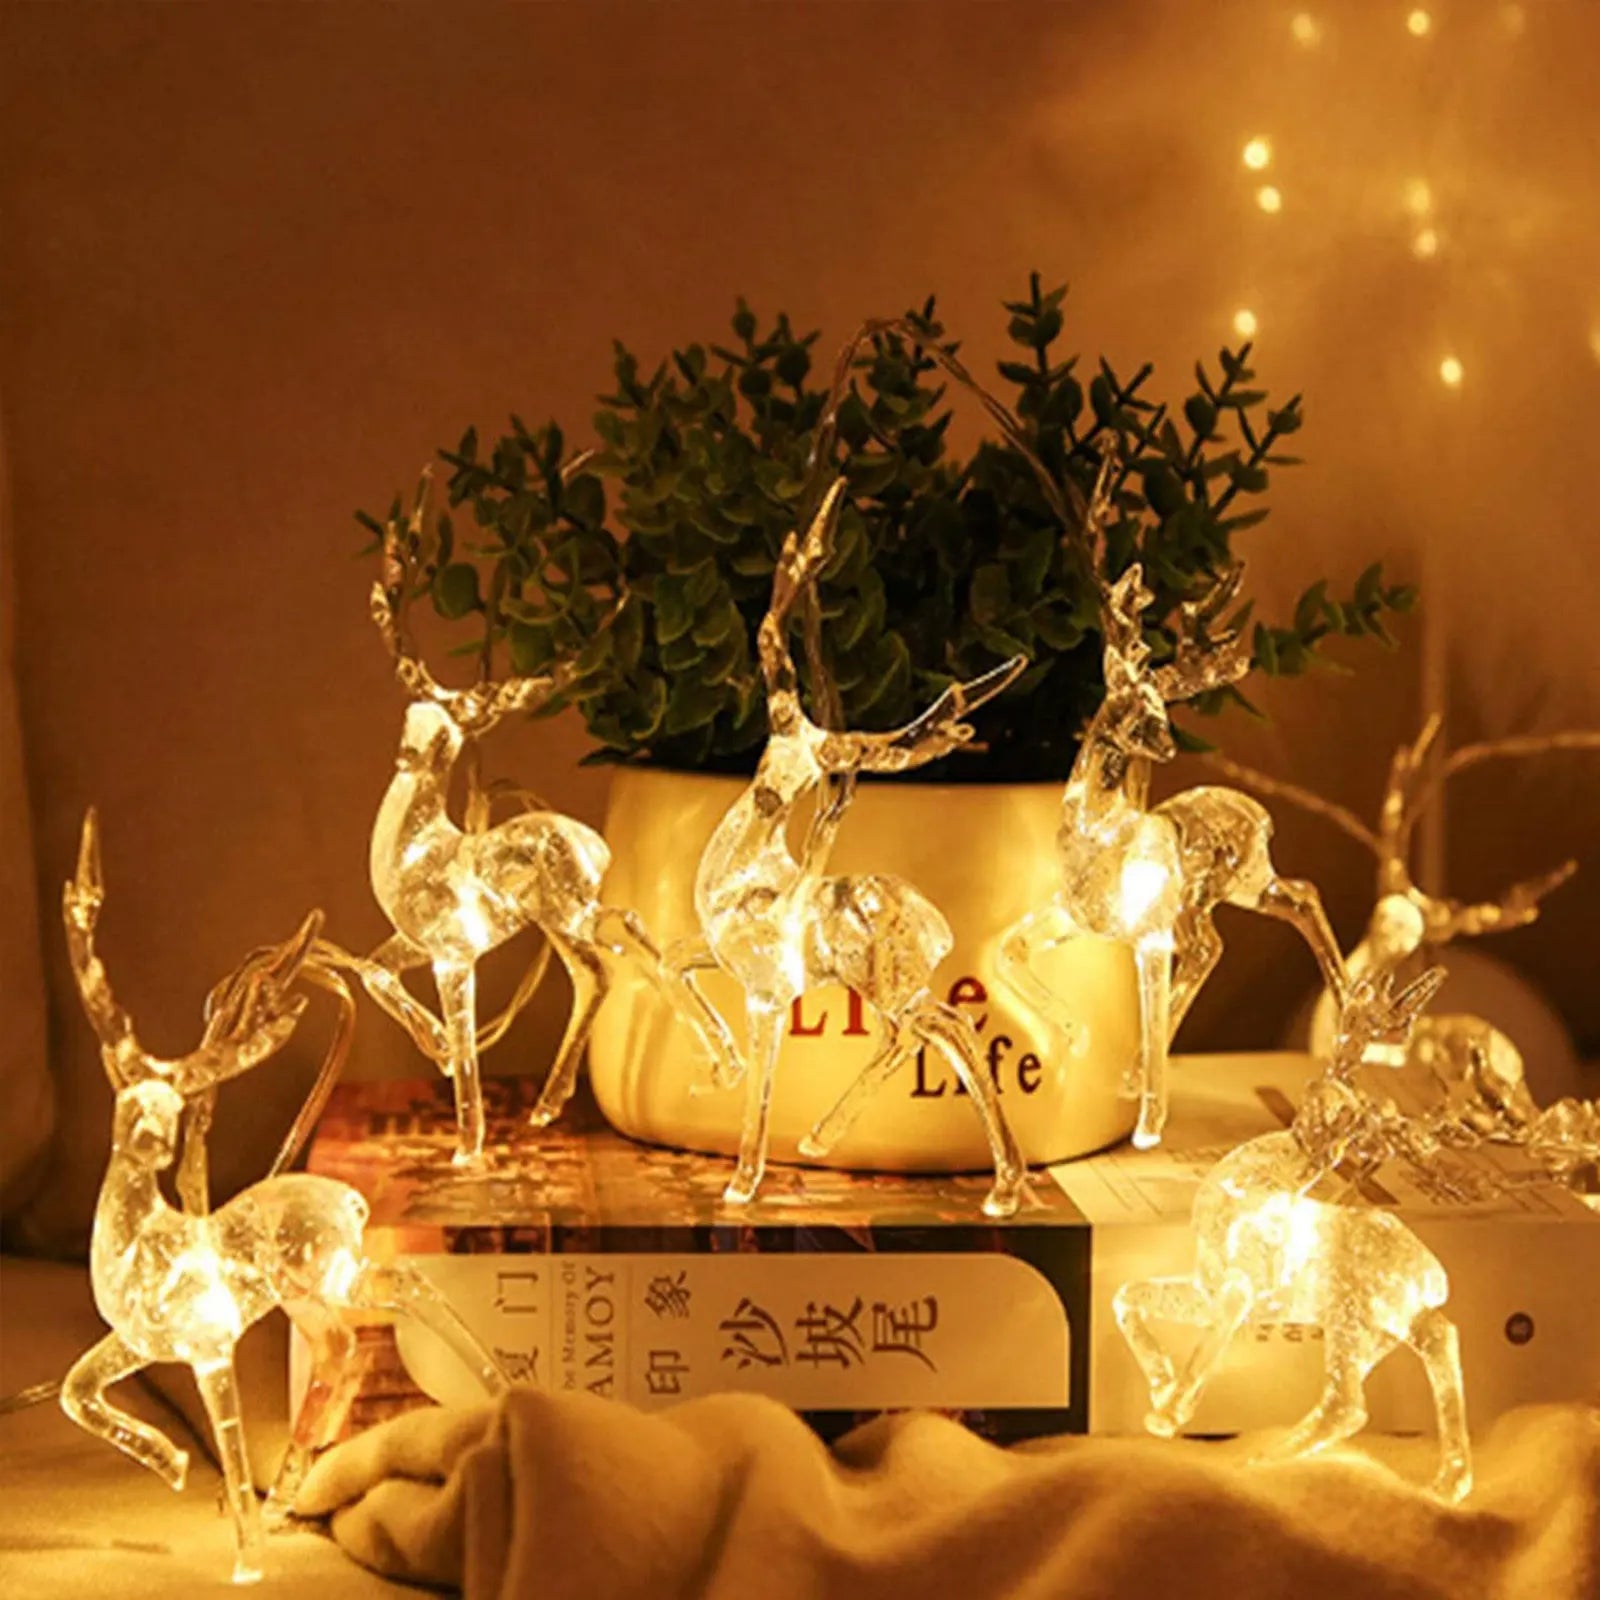 Deer Lighting Chain Battery Box Christmas elk Courtyard Decoration Small Colored Lights